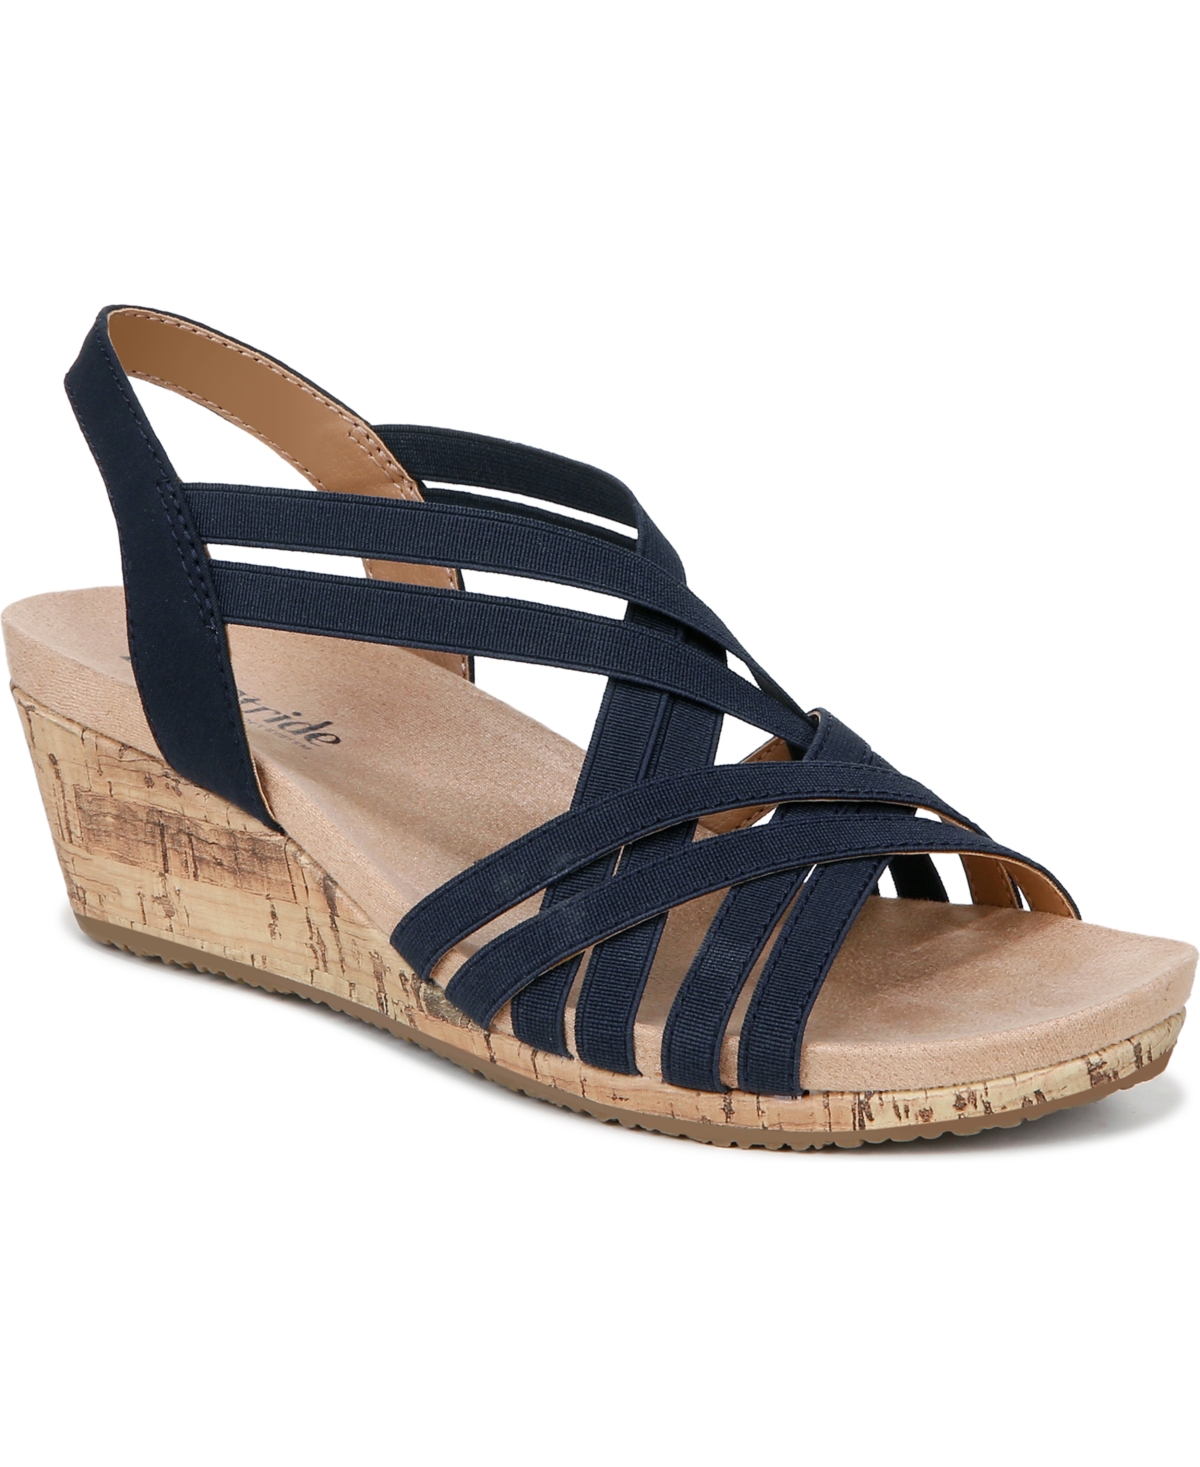 Lifestride Mallory Strappy Wedge Sandals In Lux Navy Fabric